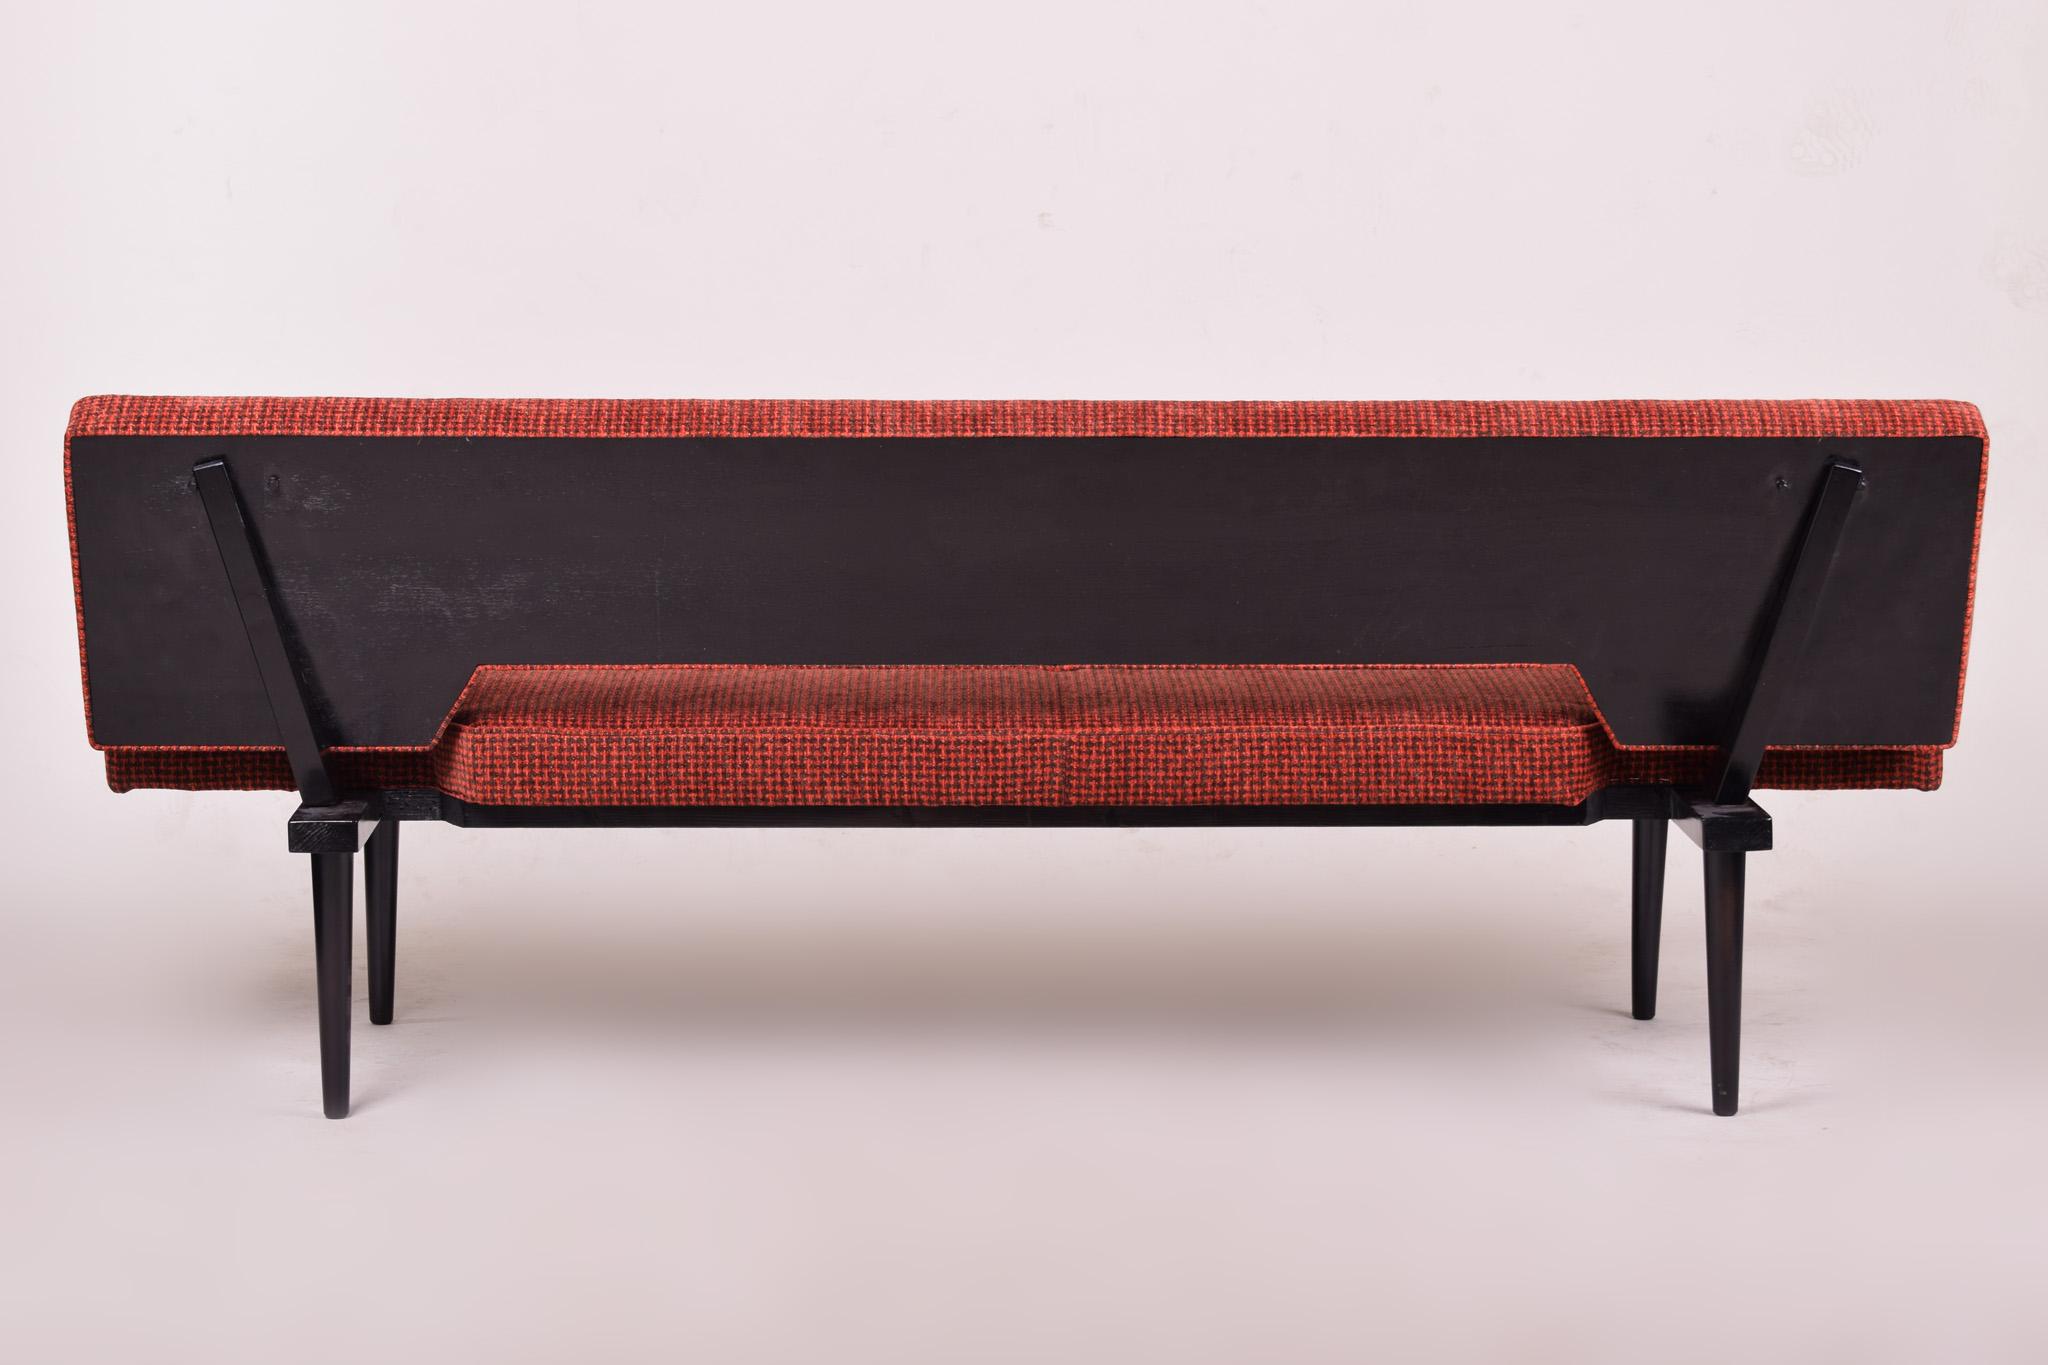 Salmon Midcentury Modern Sofa Made and Designed in 1962 by Miroslav Navratil For Sale 2